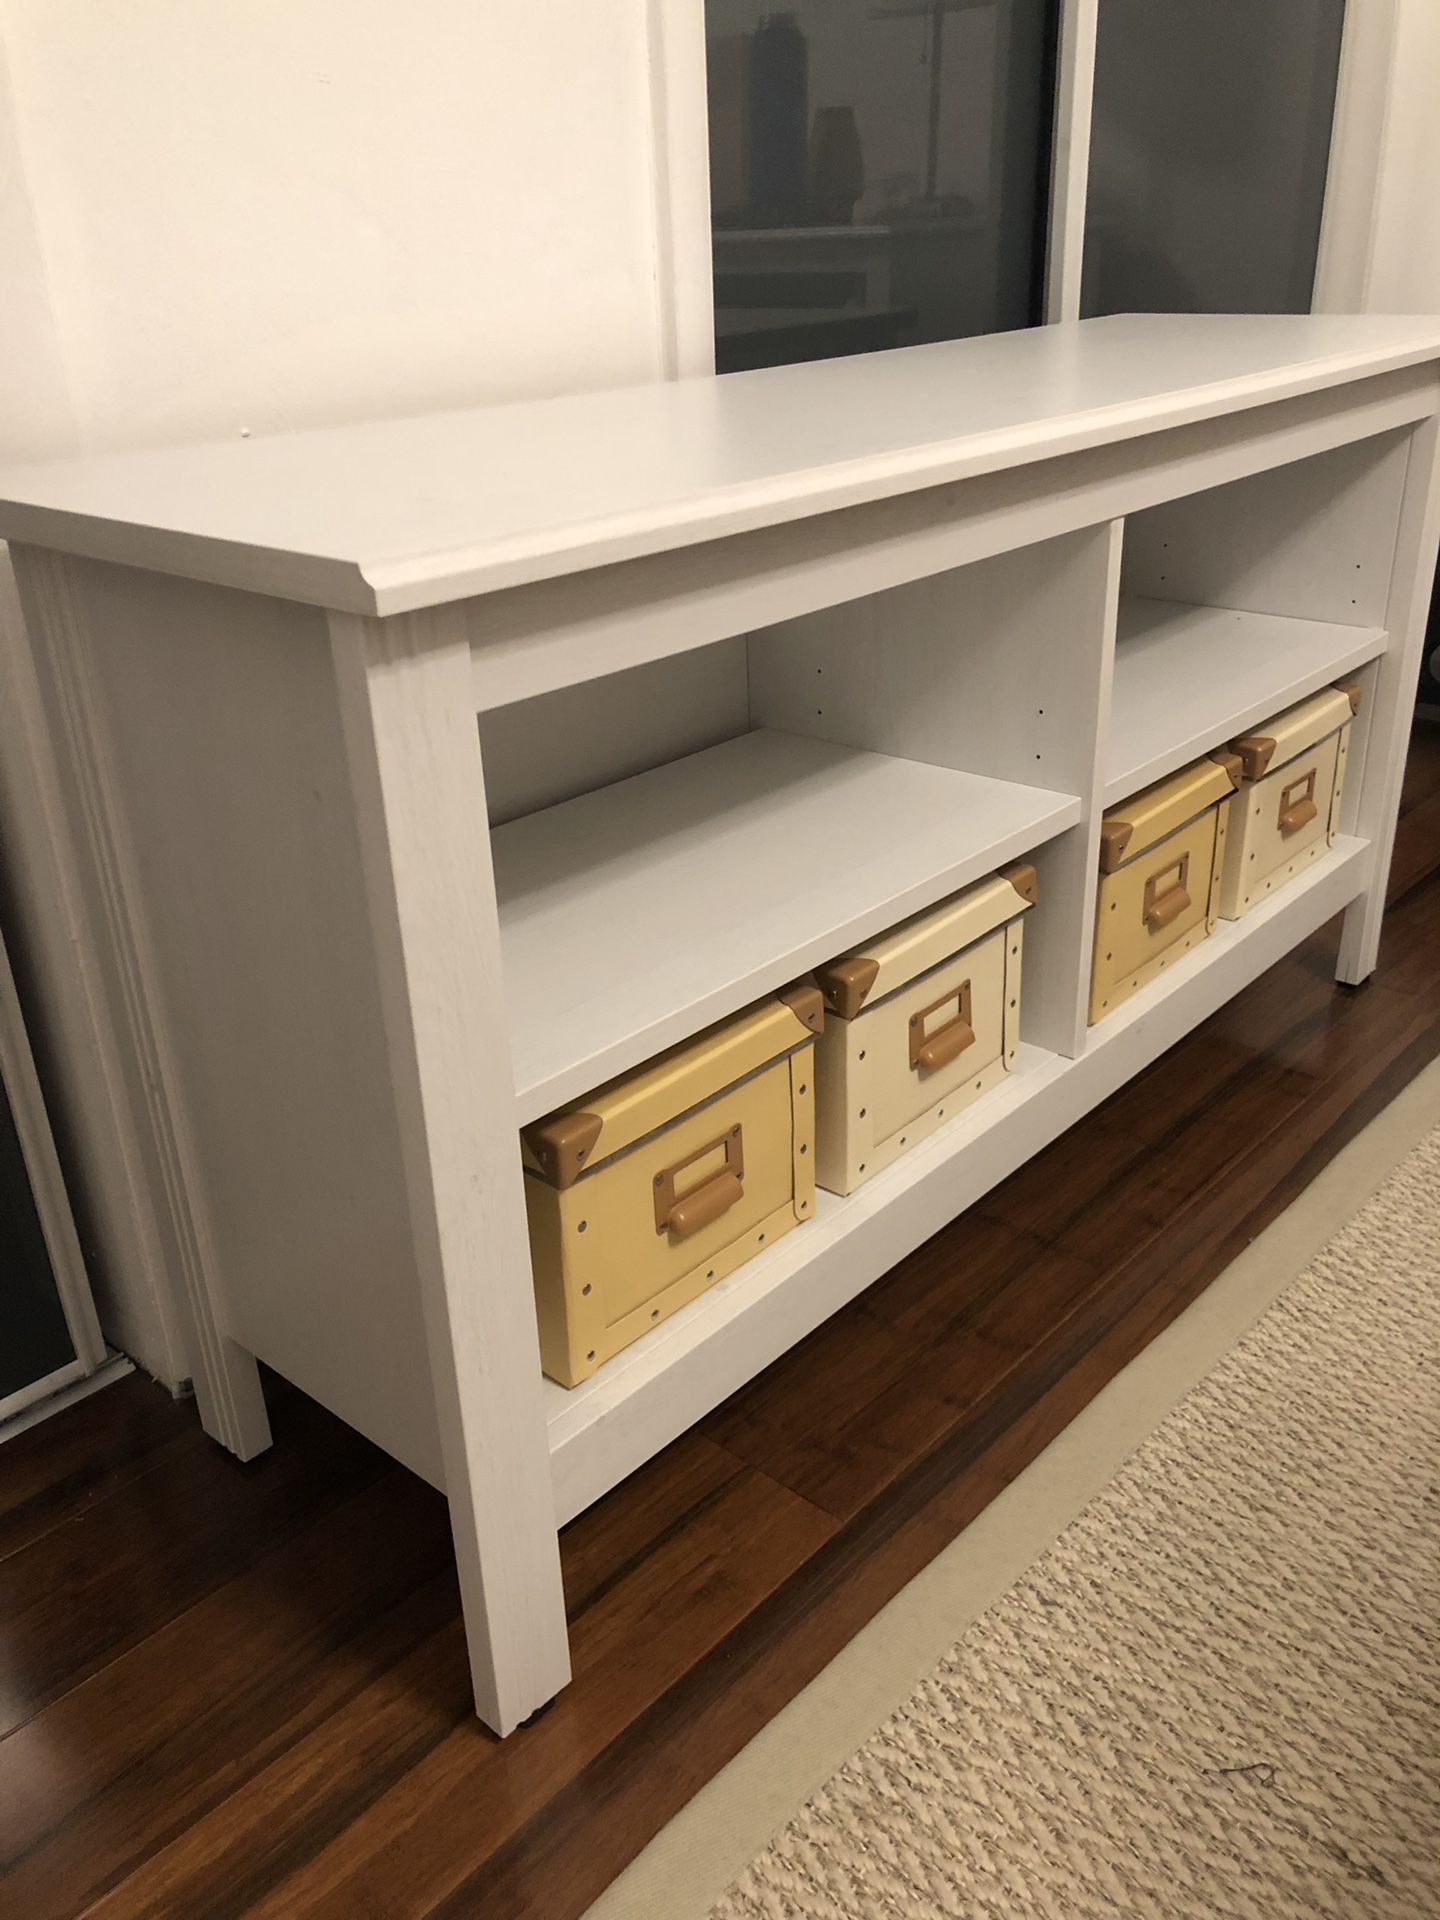 Cabinet | Shelf with boxes